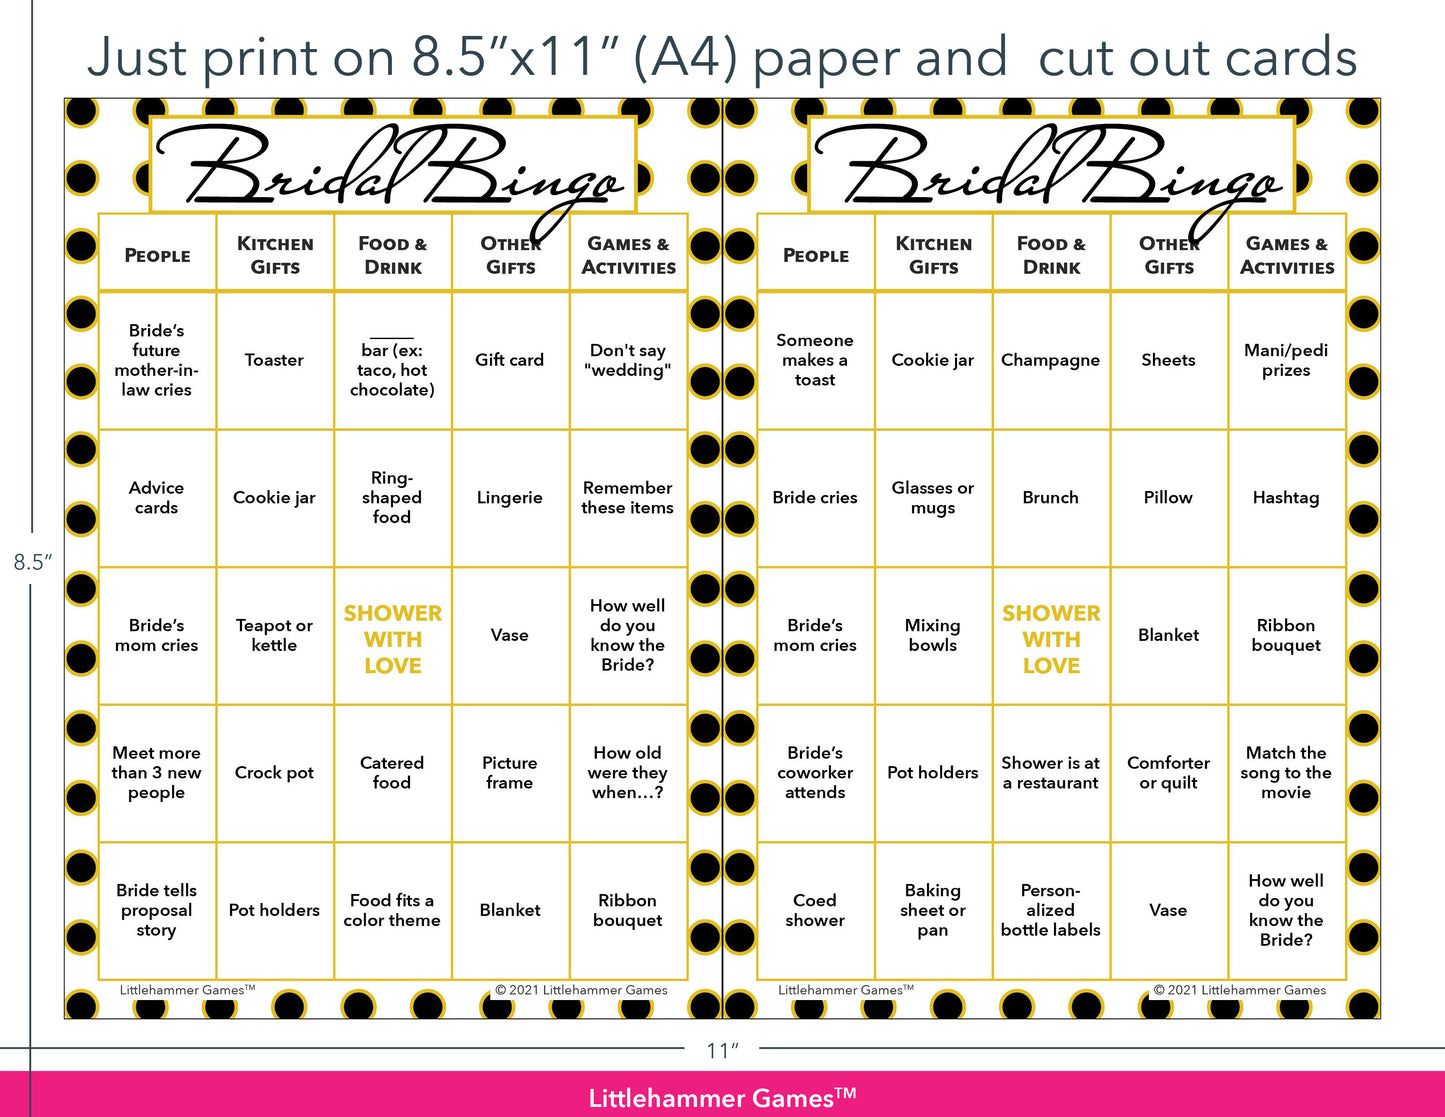 Black and gold polka dot Bridal Bingo game cards with printing instructions